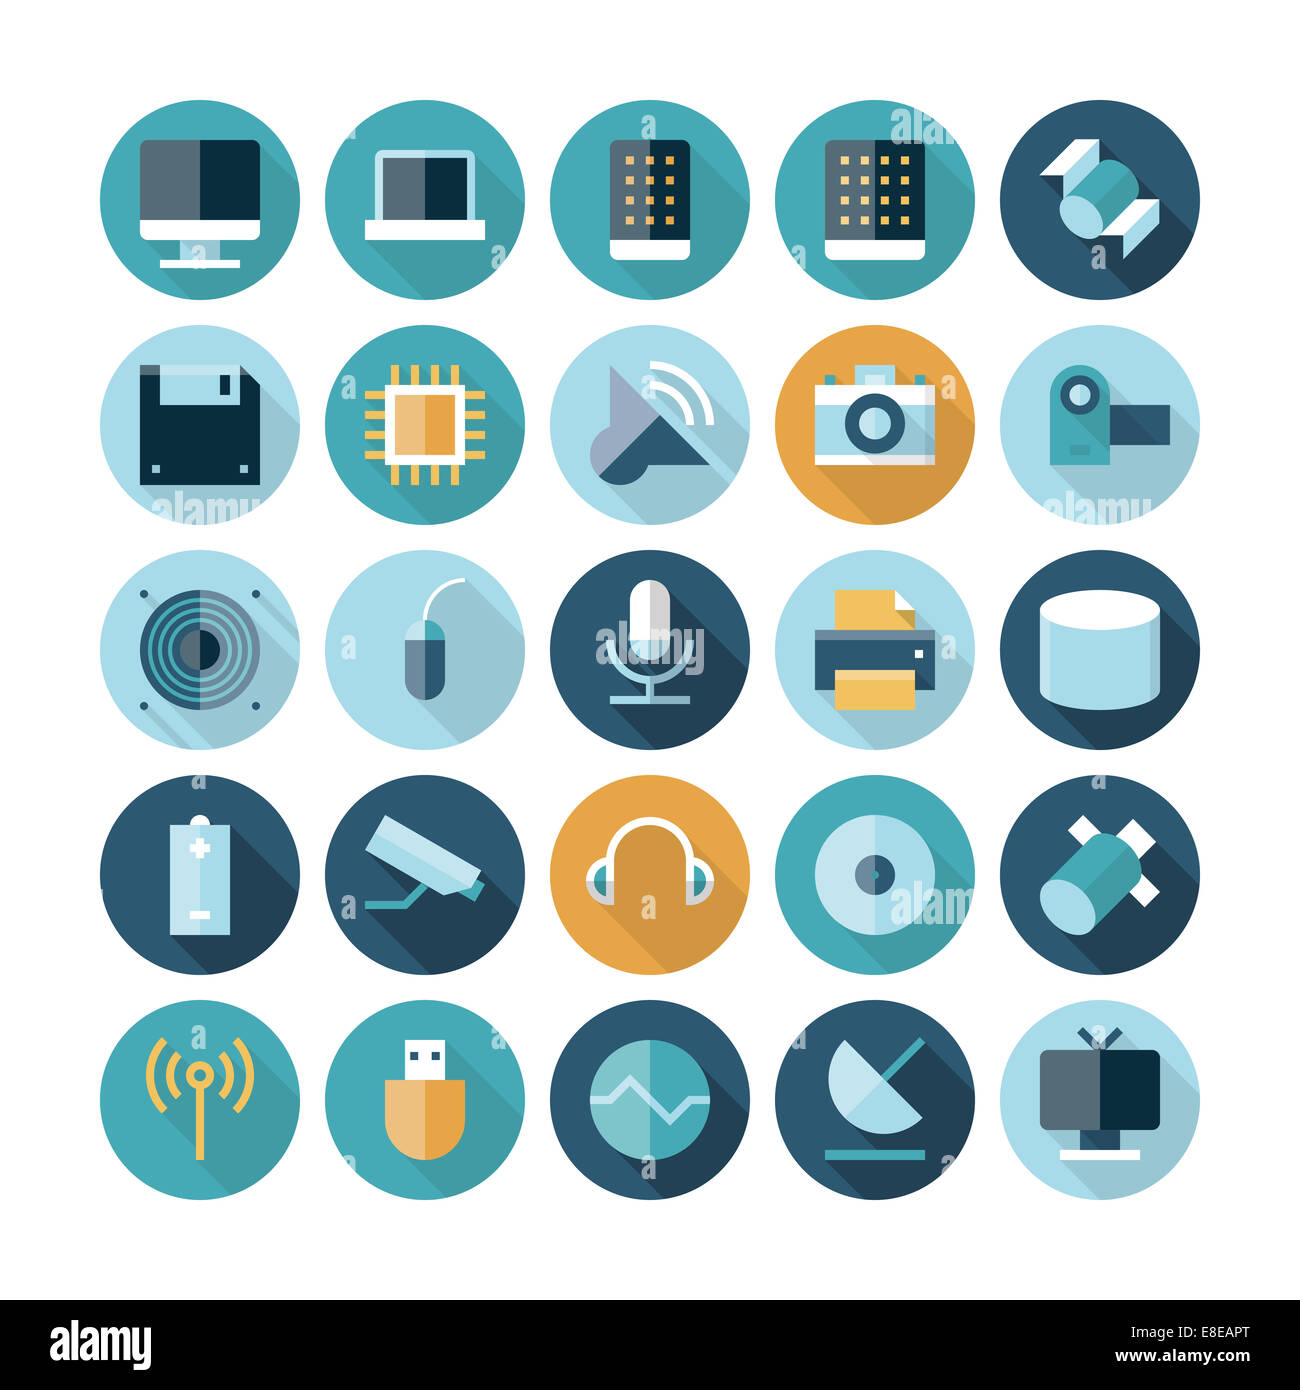 Flat design icons for technology and devices. Stock Photo